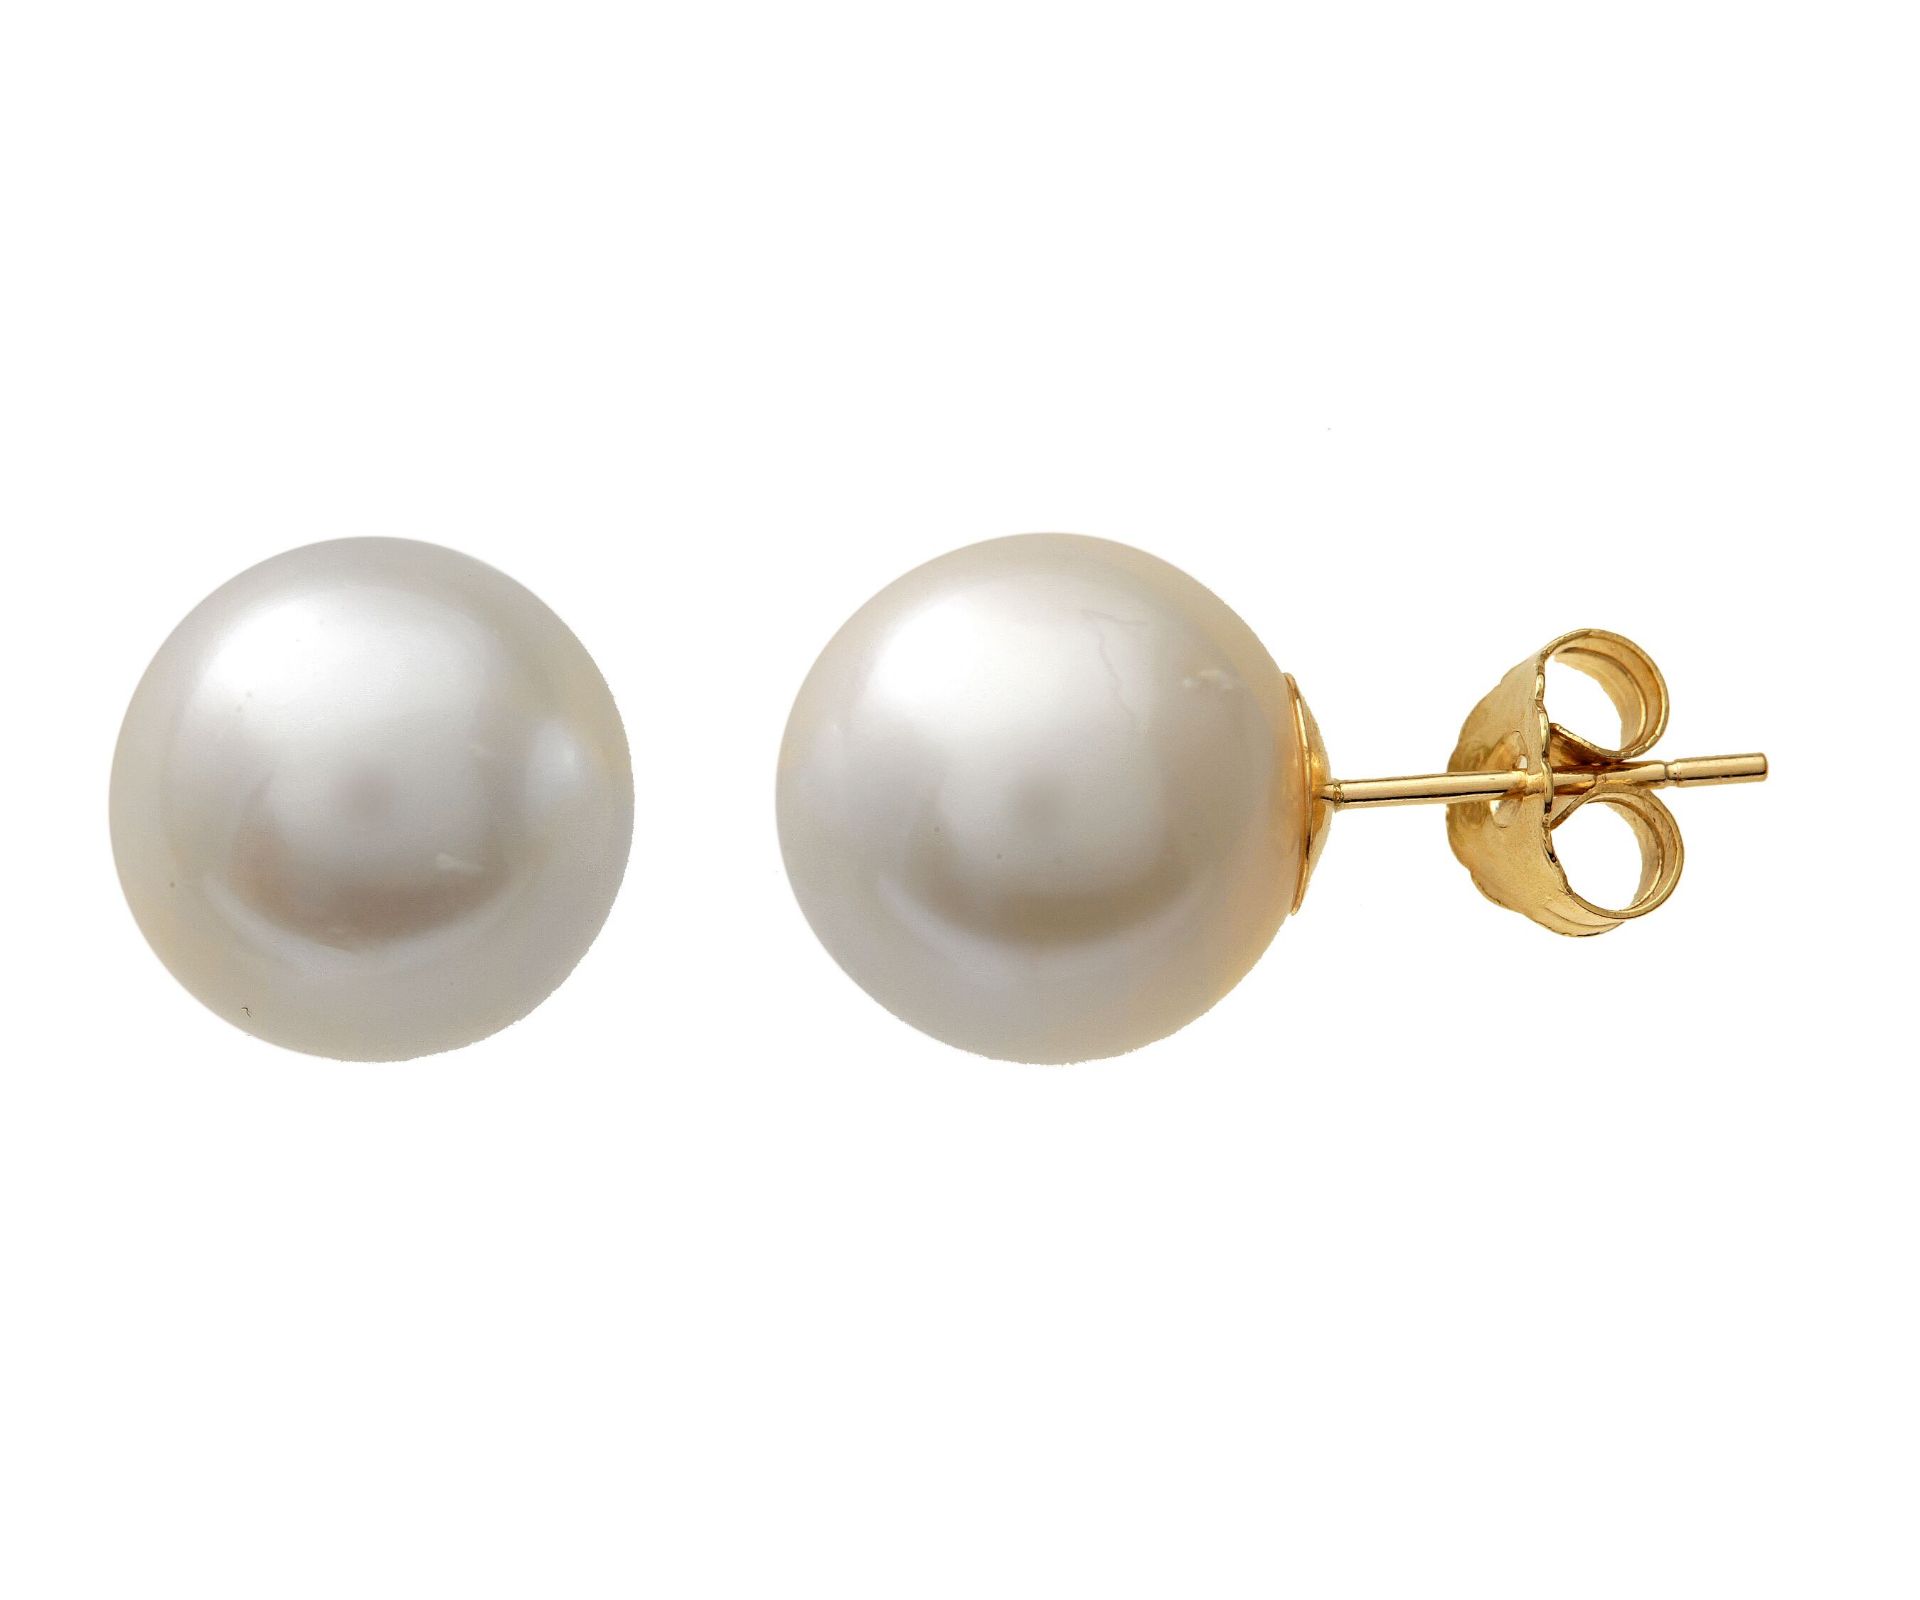 6MM Pearl Studs in 9ct Yellow Gold, Metal 9ct Yellow Gold, Weight (g) 0.8, RRP £69.99 (E30315-P)(